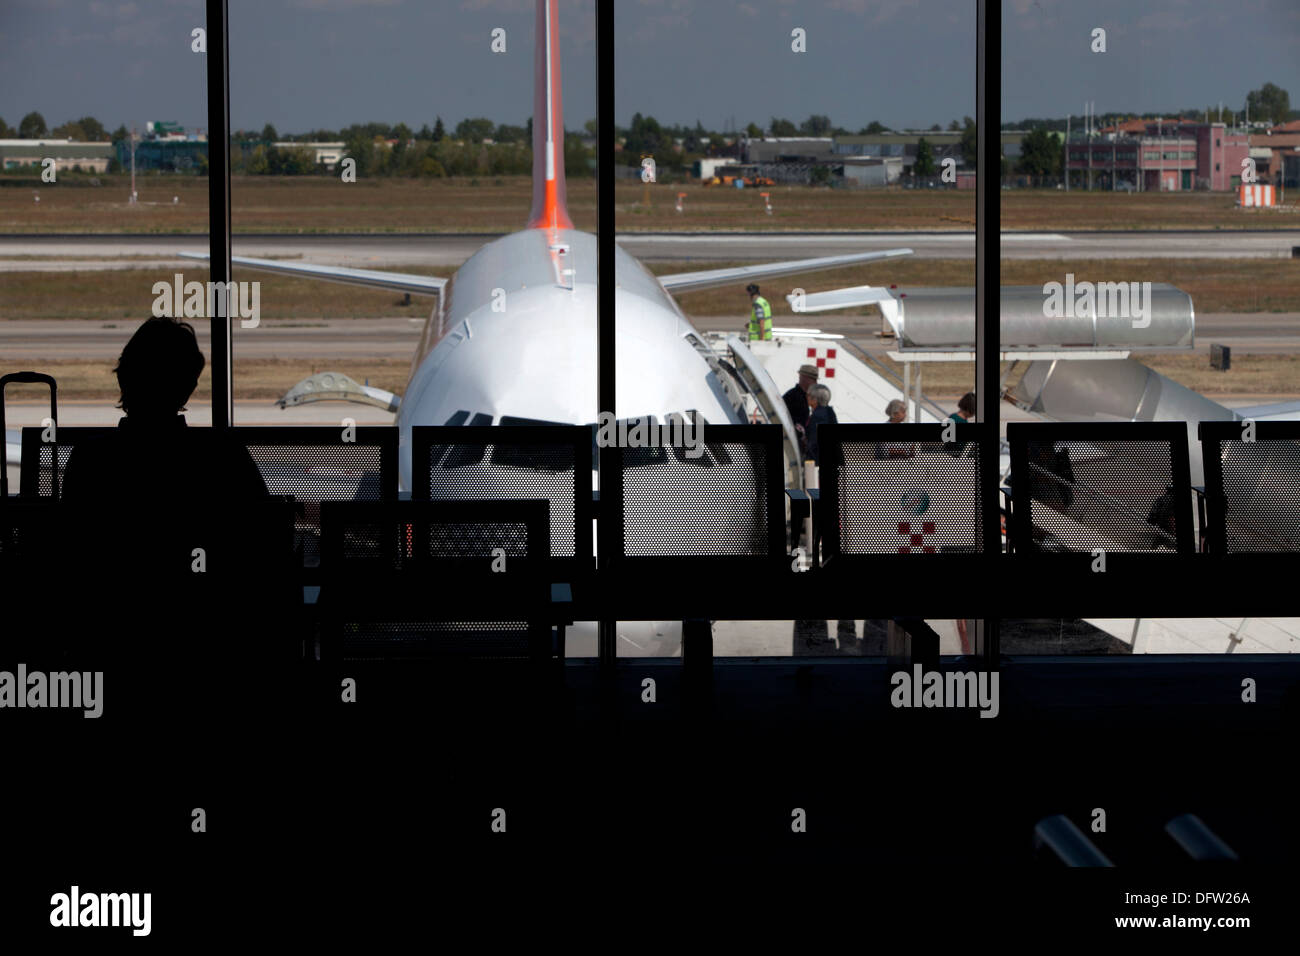 Passengers waiting to board an aircraft in an airport terminal Stock Photo